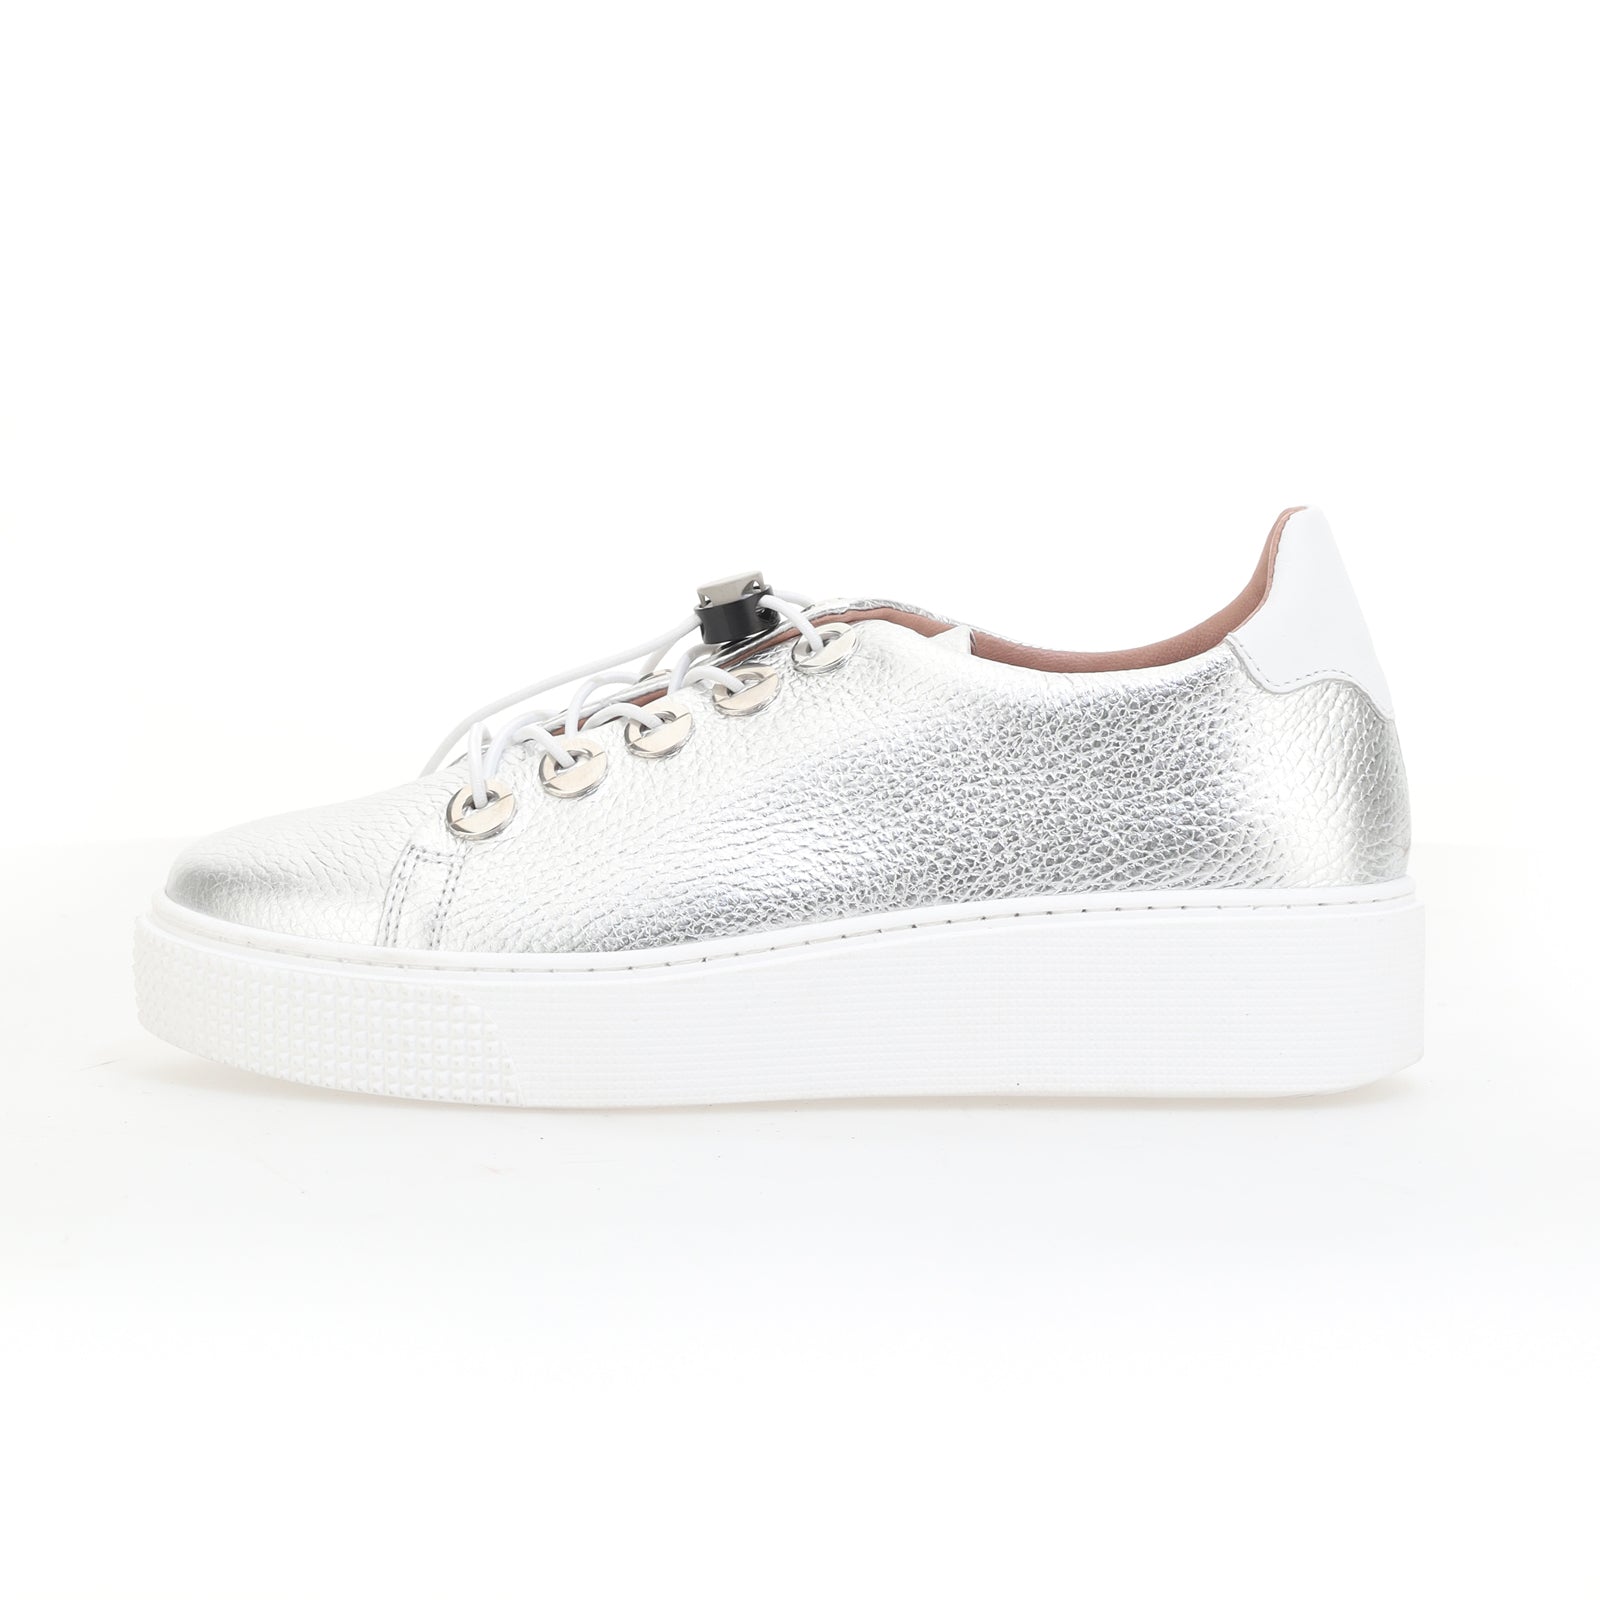 MJUS - Lace Up Sneaker in Argento